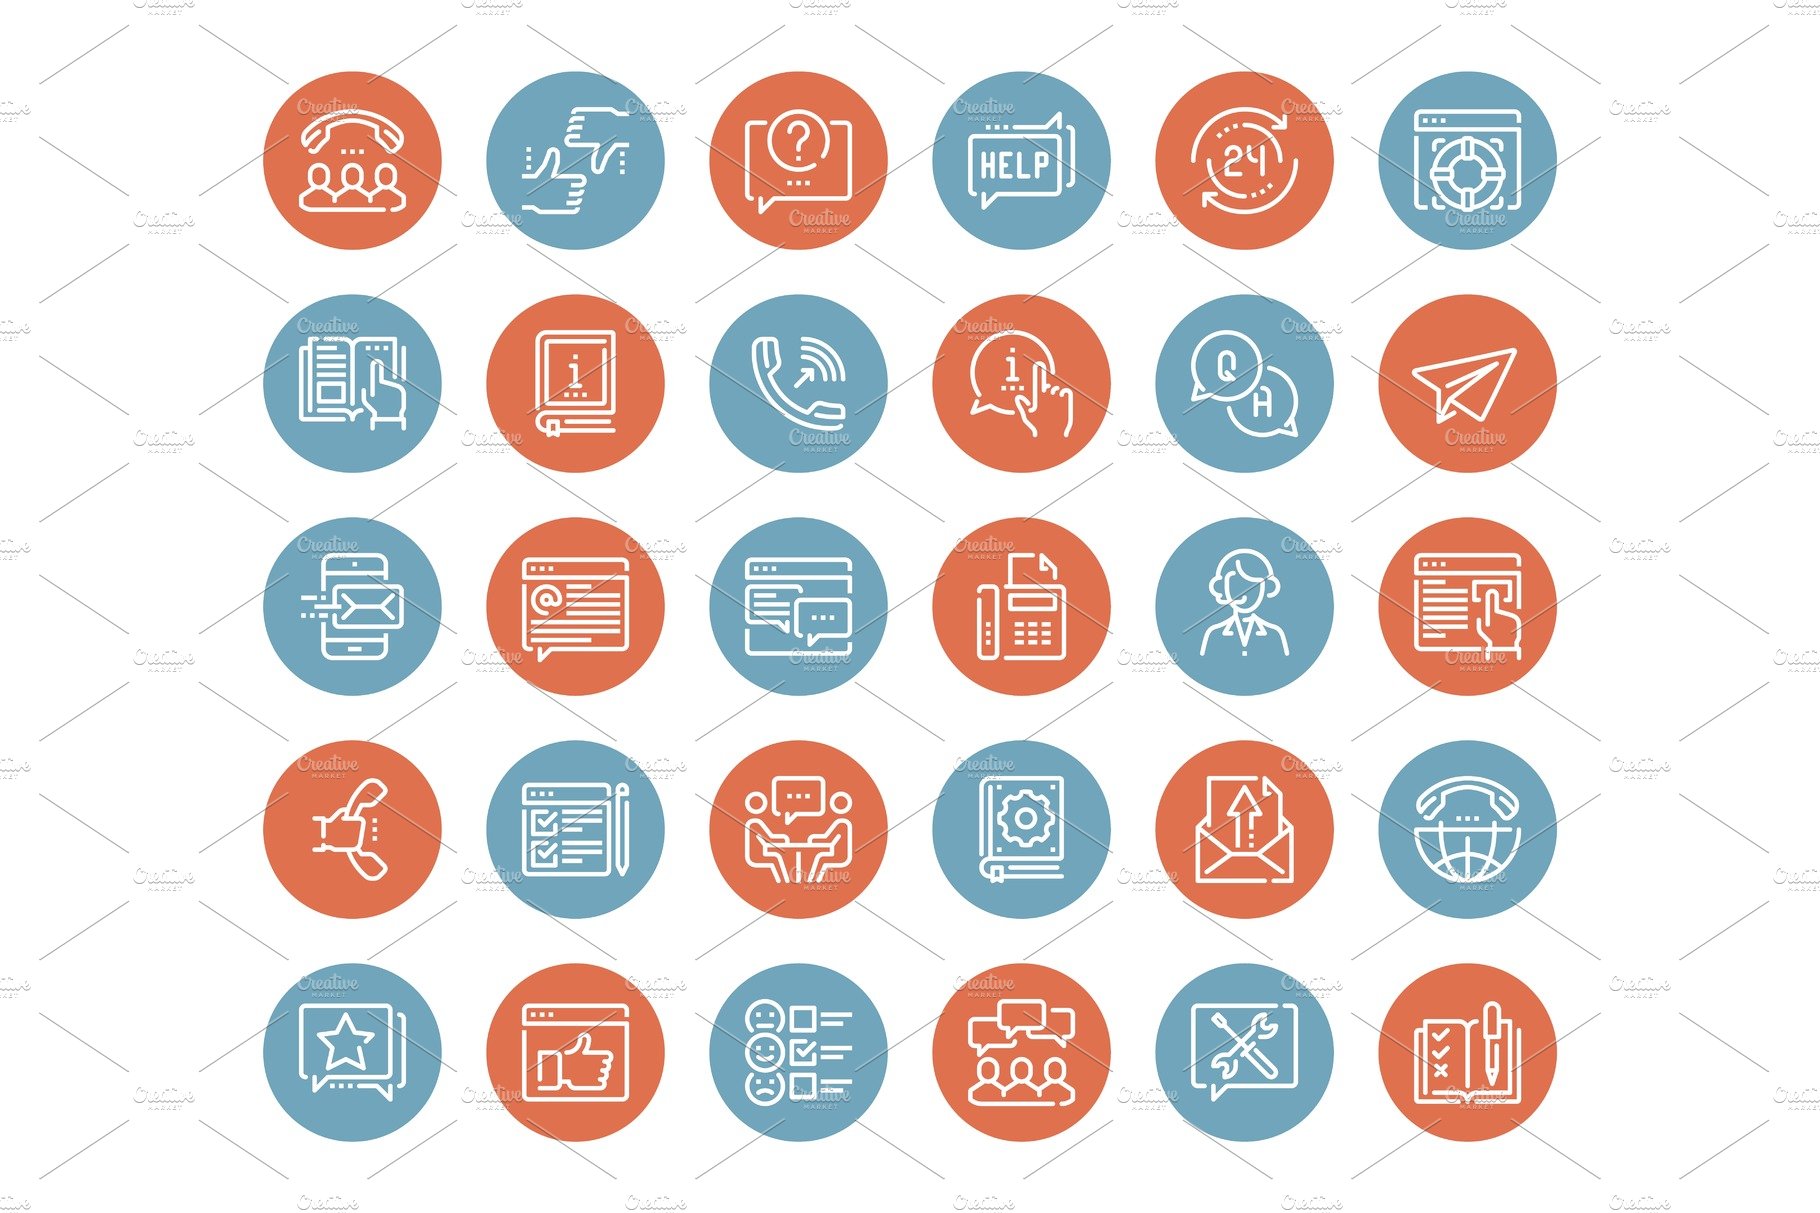 Customer Service Icons cover image.